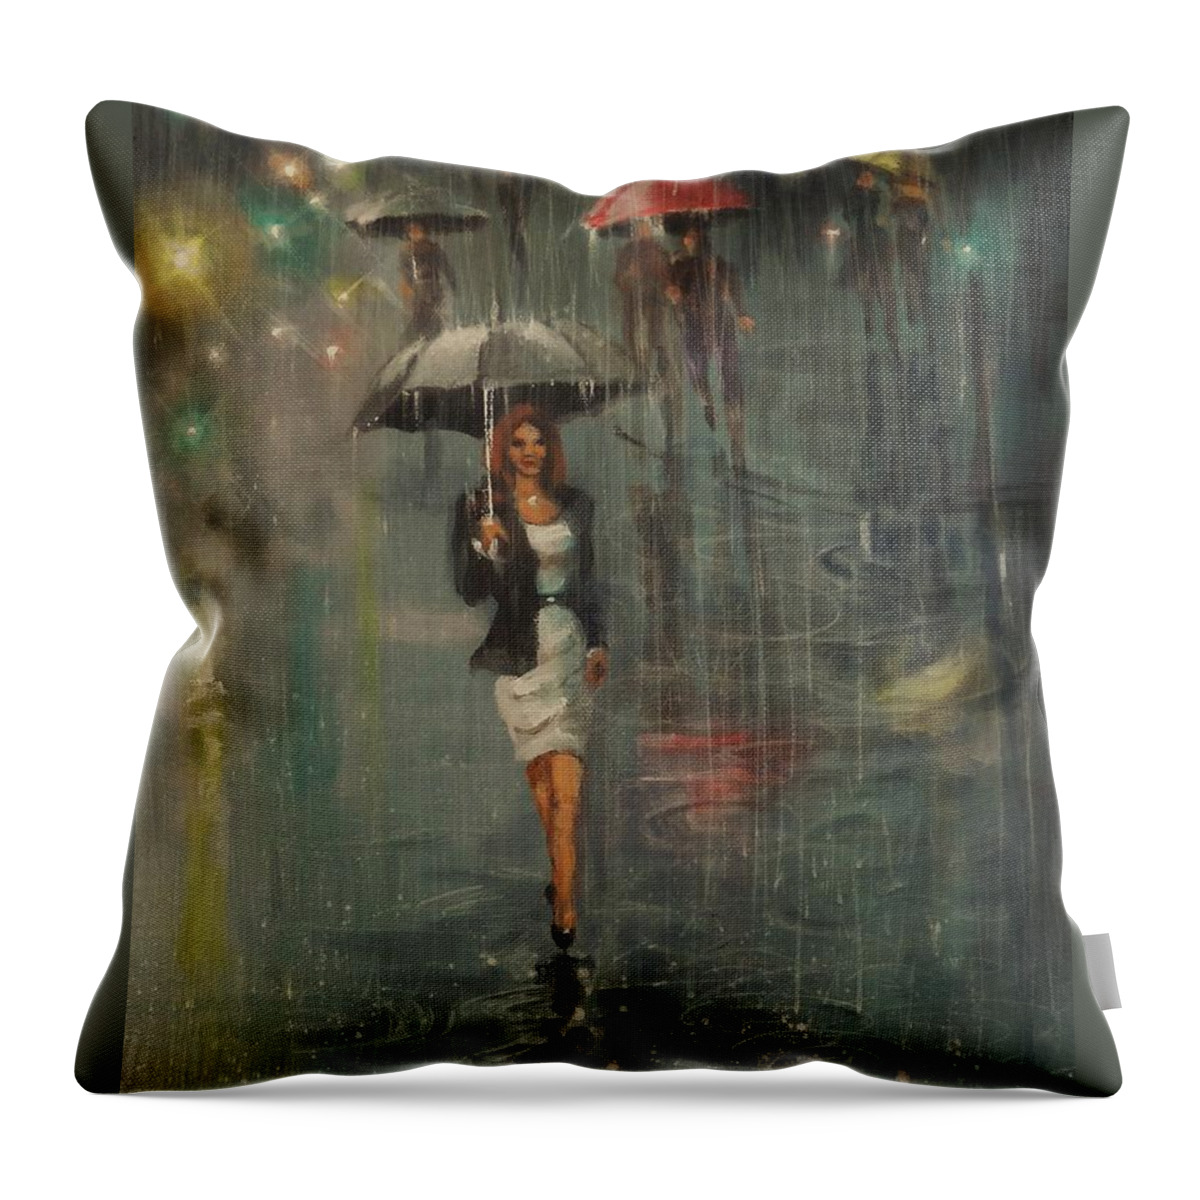 Woman With Umbrella Throw Pillow featuring the painting Rain in the City by Tom Shropshire